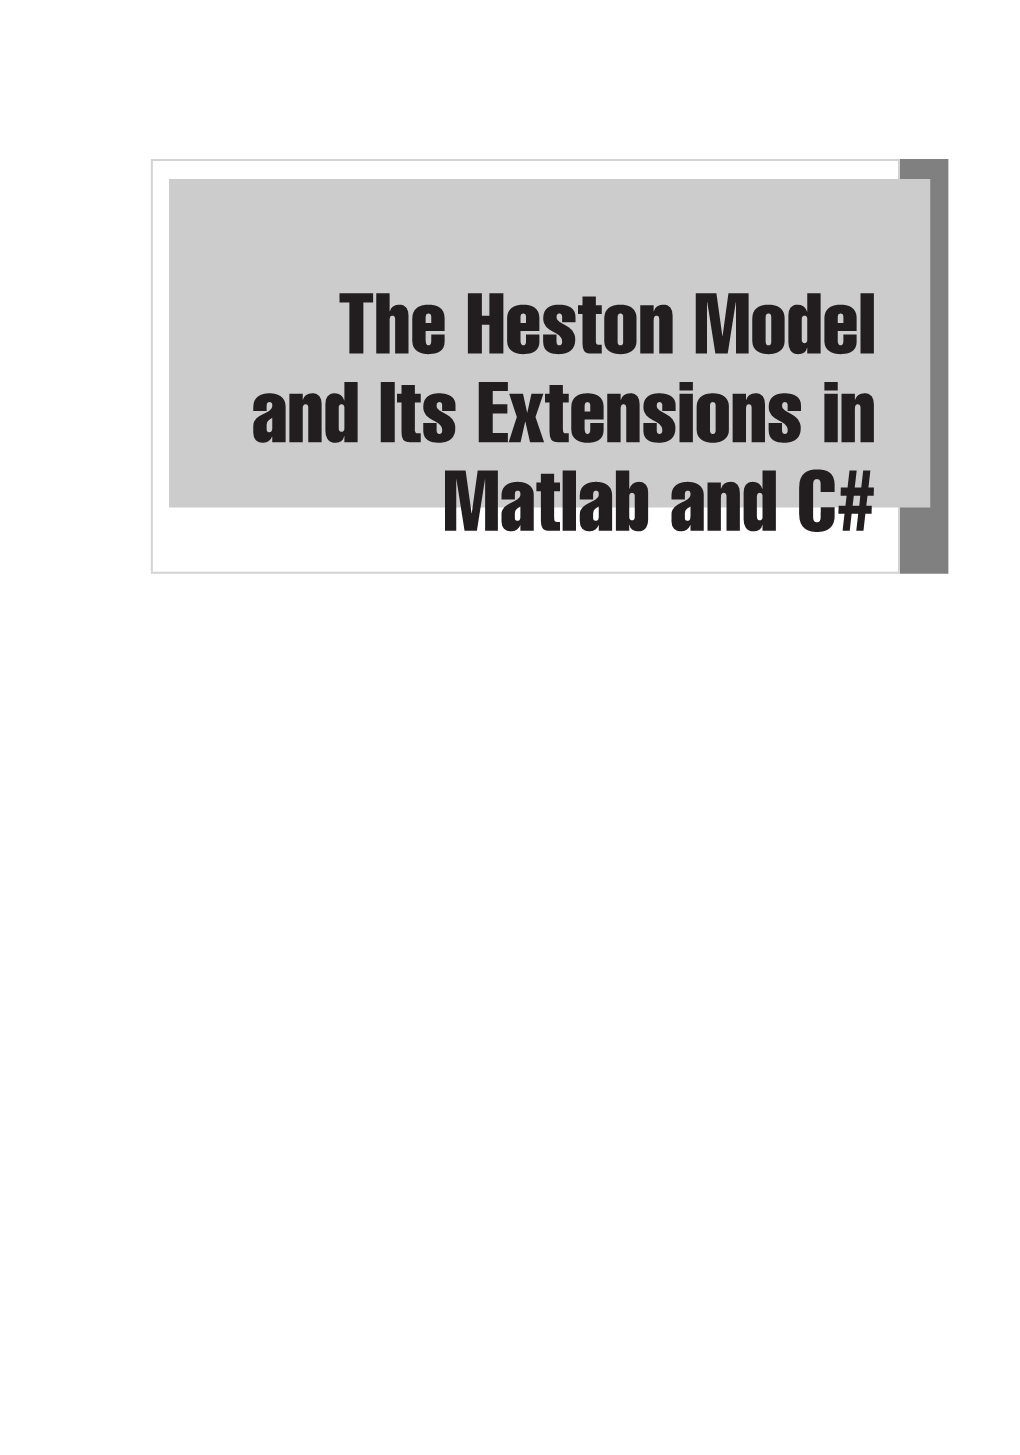 The Heston Model and Its Extensions in Matlab and C# Founded in 1807, John Wiley & Sons Is the Oldest Independent Publishing Company in the United States